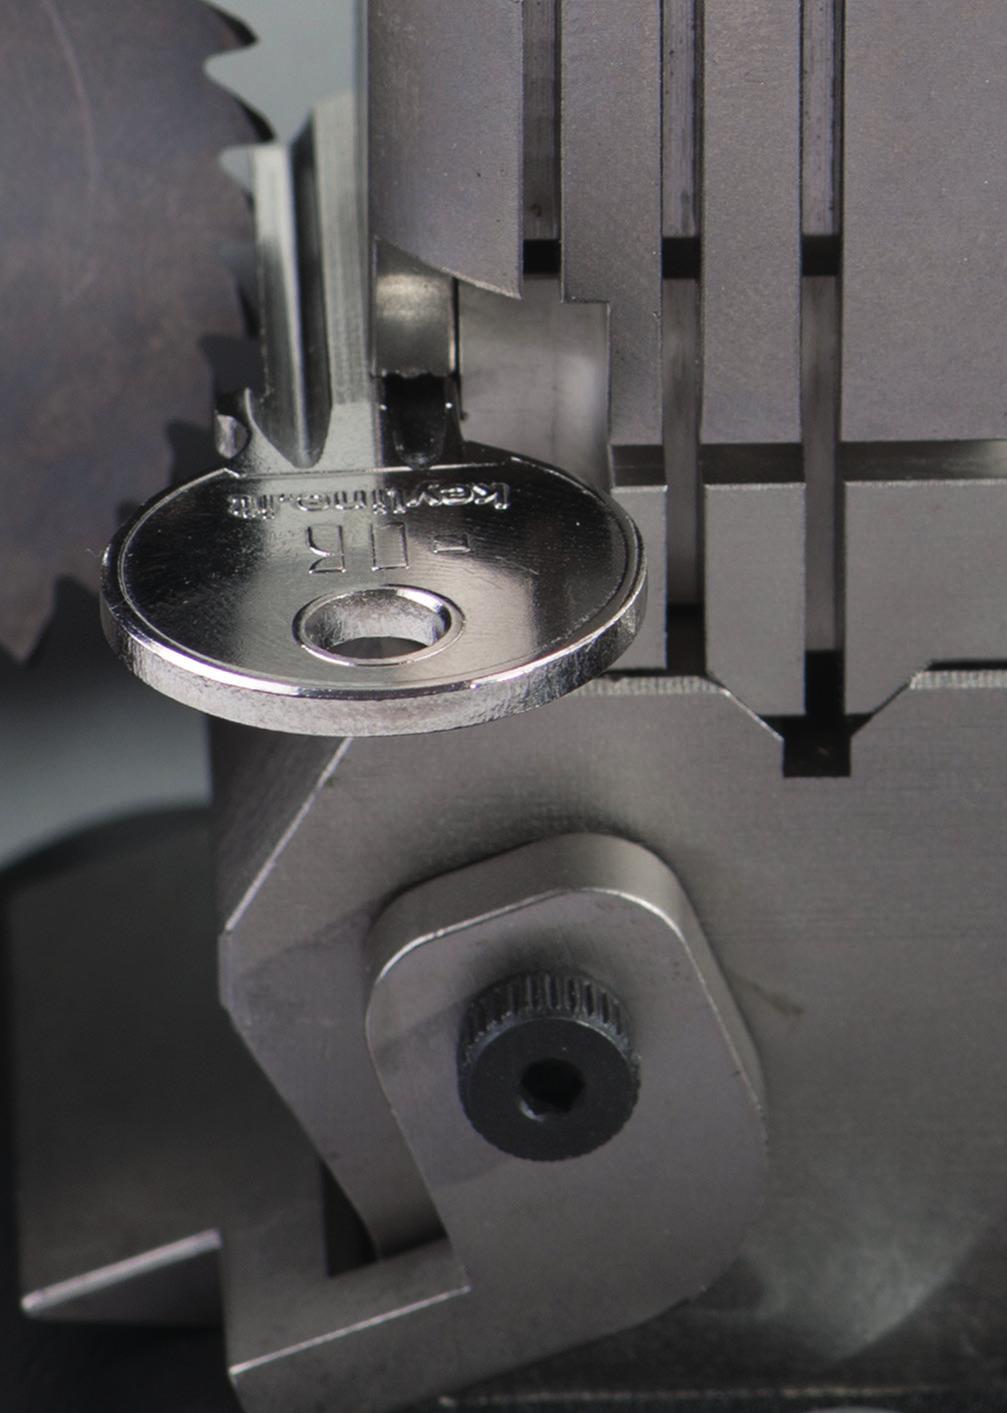 Ninja Laser combines the mechanical and electronic precision to guarantee unique key cutting performances and quality through two different technologies: a double speed prismatic cutter and an end